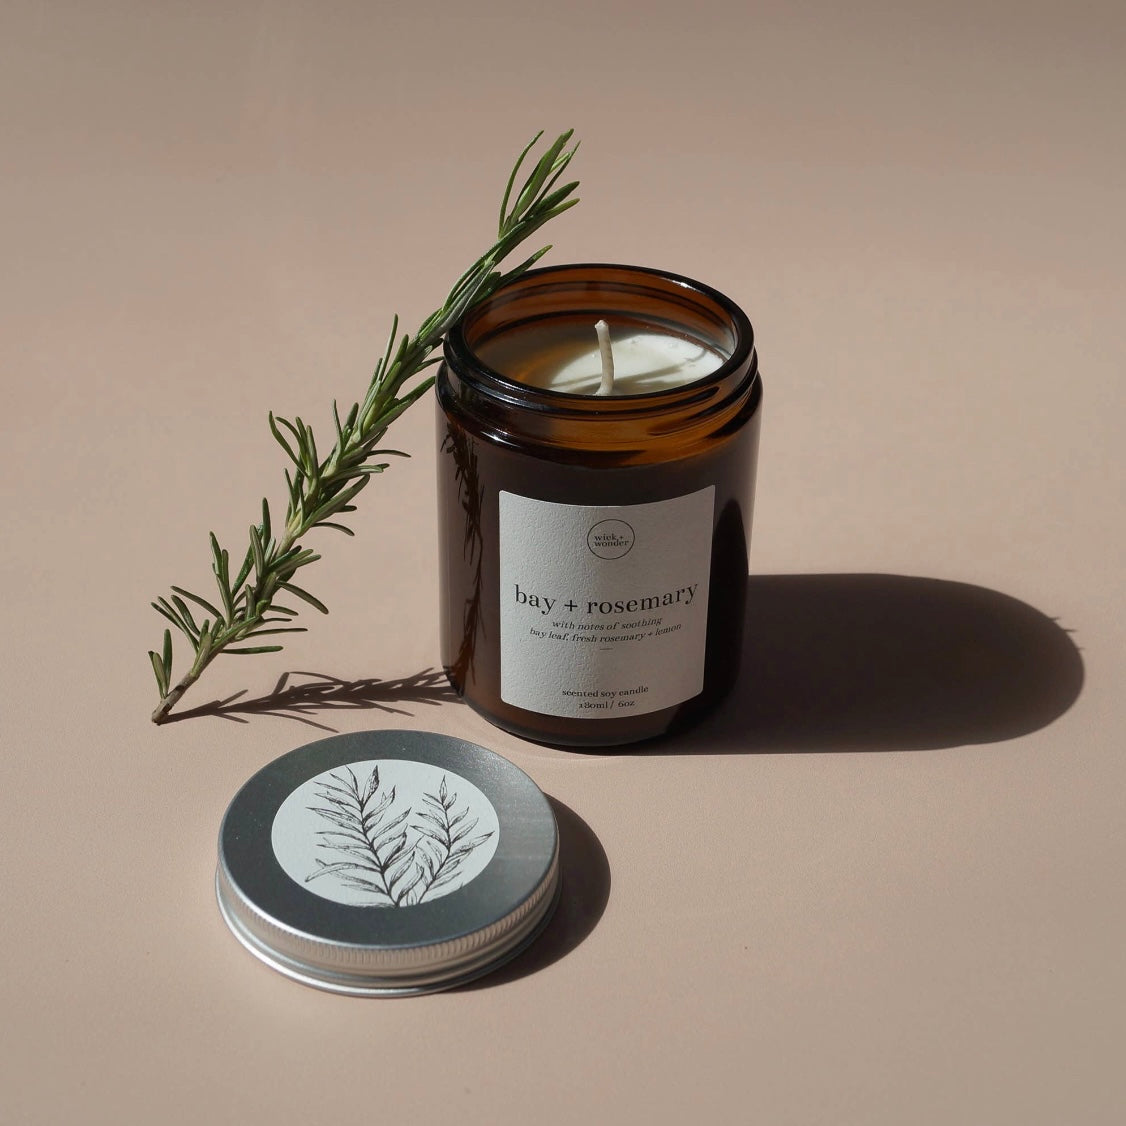 BAY AND ROSEMARY CANDLE